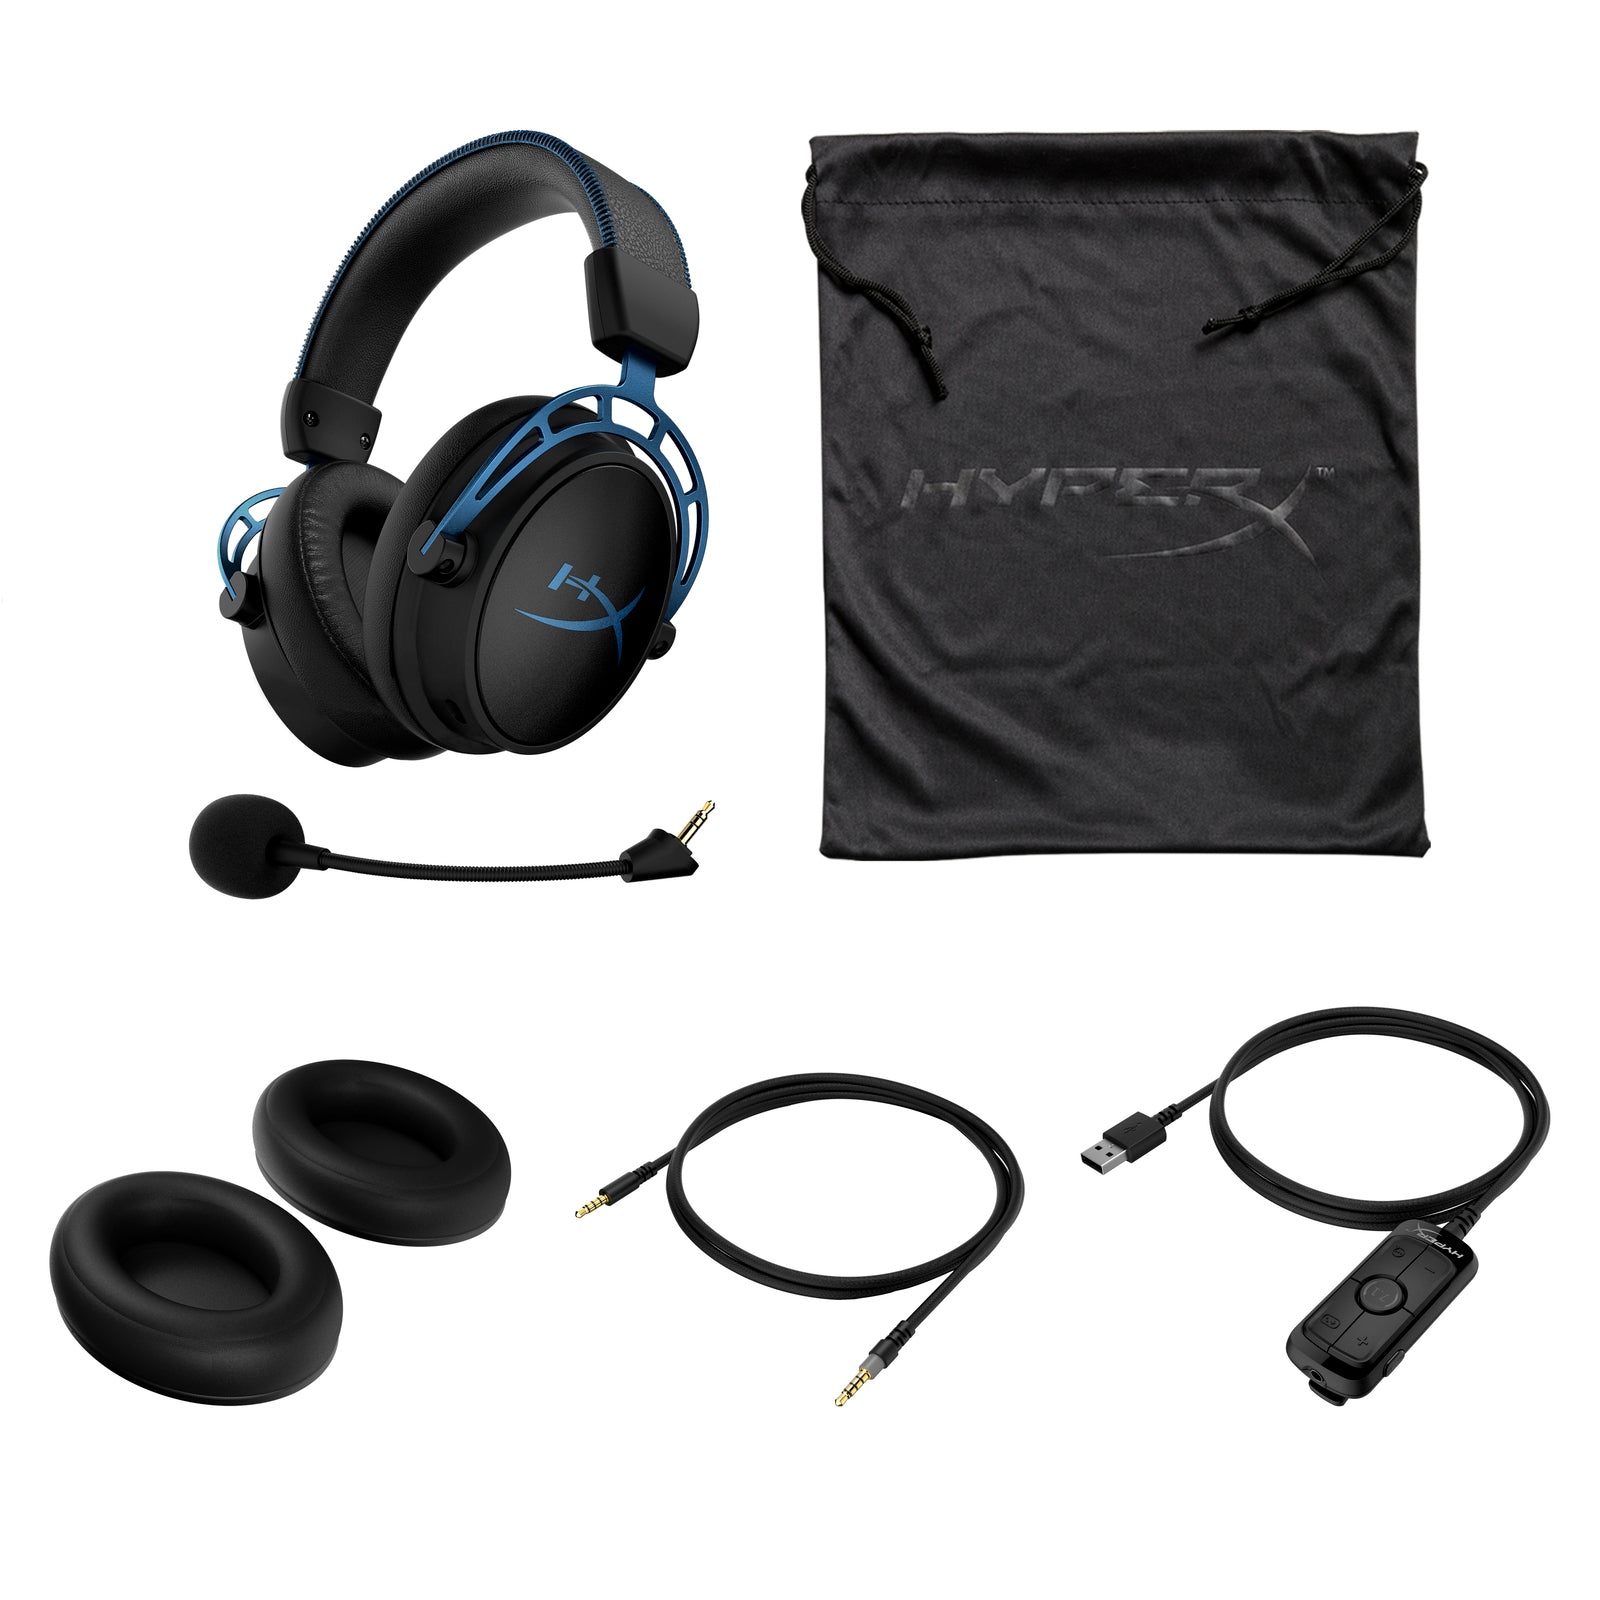  HyperX Cloud Alpha S - PC Gaming Headset, 7.1 Surround Sound,  Adjustable Bass, Dual Chamber Drivers, Chat Mixer, Breathable Leatherette,  Memory Foam, and Noise Cancelling Microphone – Blackout : Everything Else